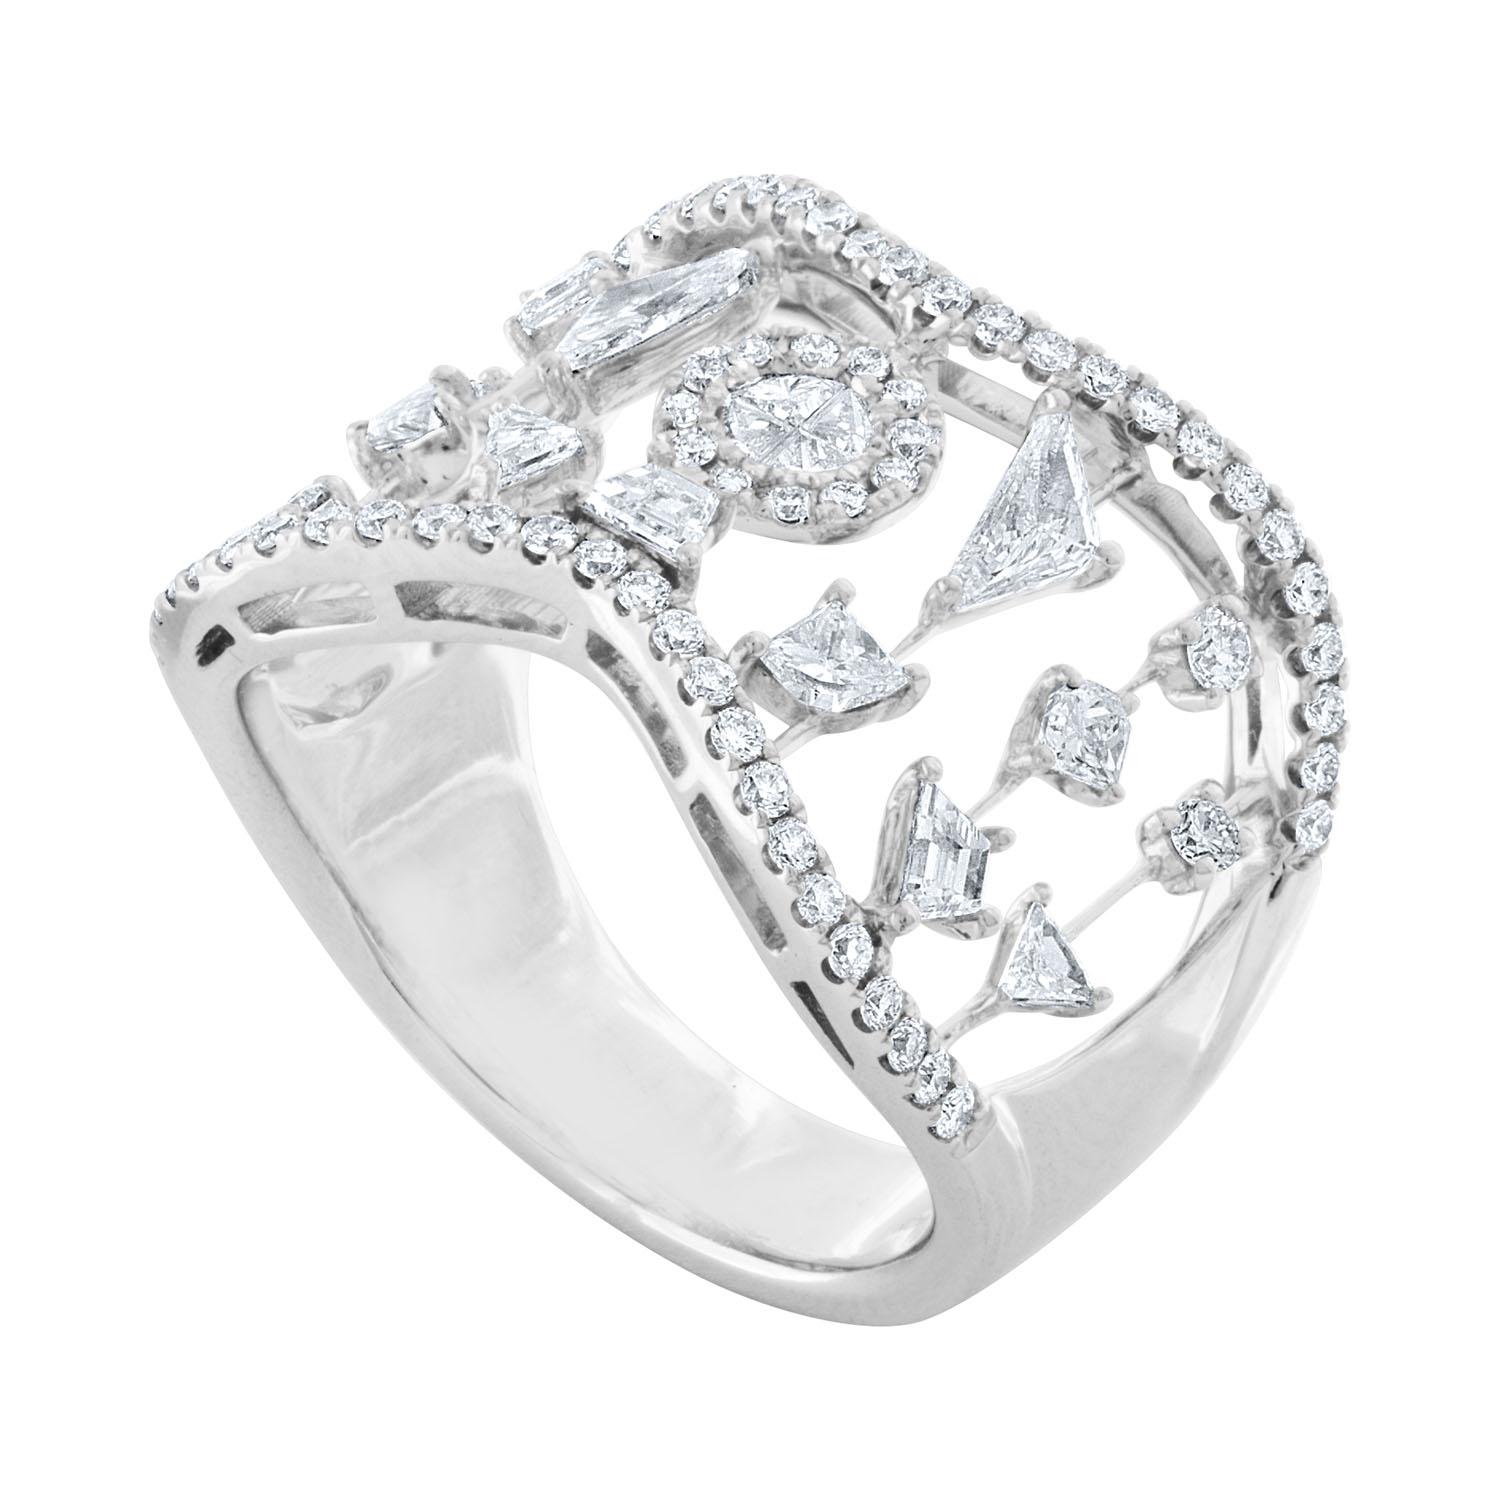 Geometric Diamond Shapes Scattered on Bars
The ring is 18K White Gold
The ring has 1.13 Carats in Diamonds G/H/I/J VS/SI
The ring is a size 6.5, sizable.
The ring weighs 8.00 grams.